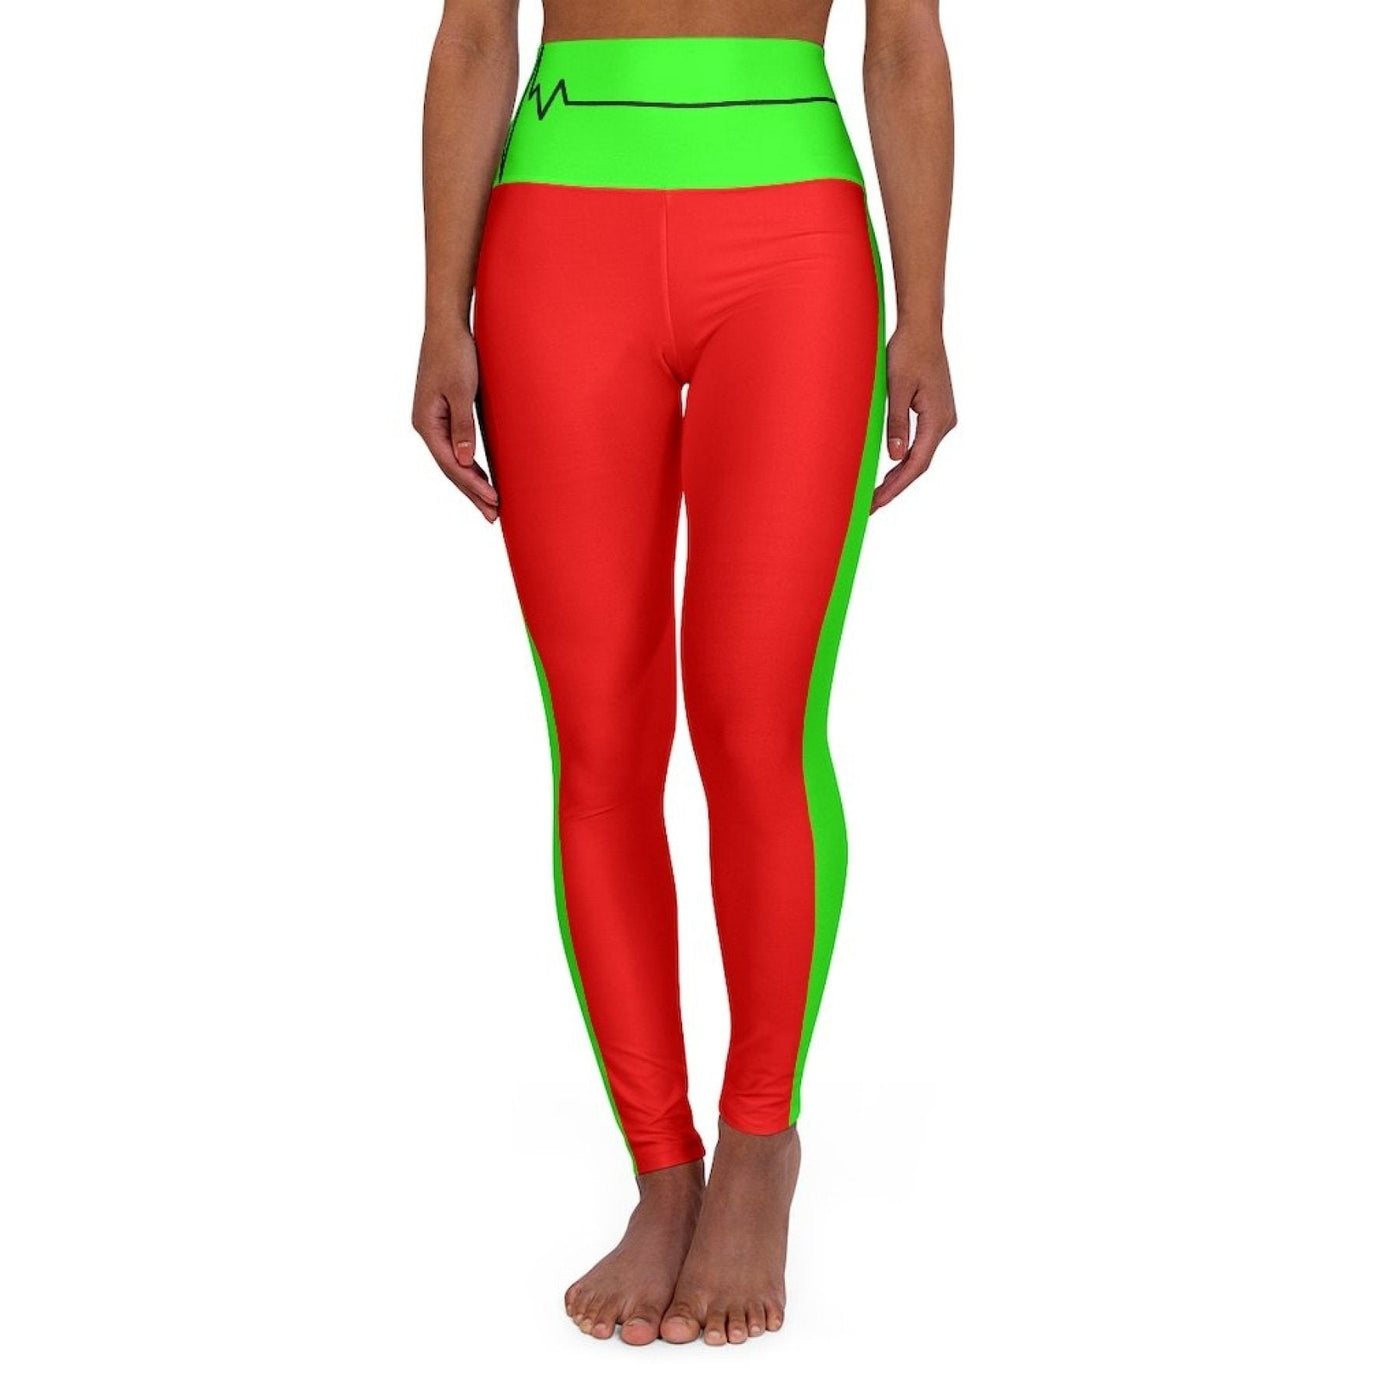 High Waisted Yoga Leggings Red And Neon Green Beating Heart Sports Pants -